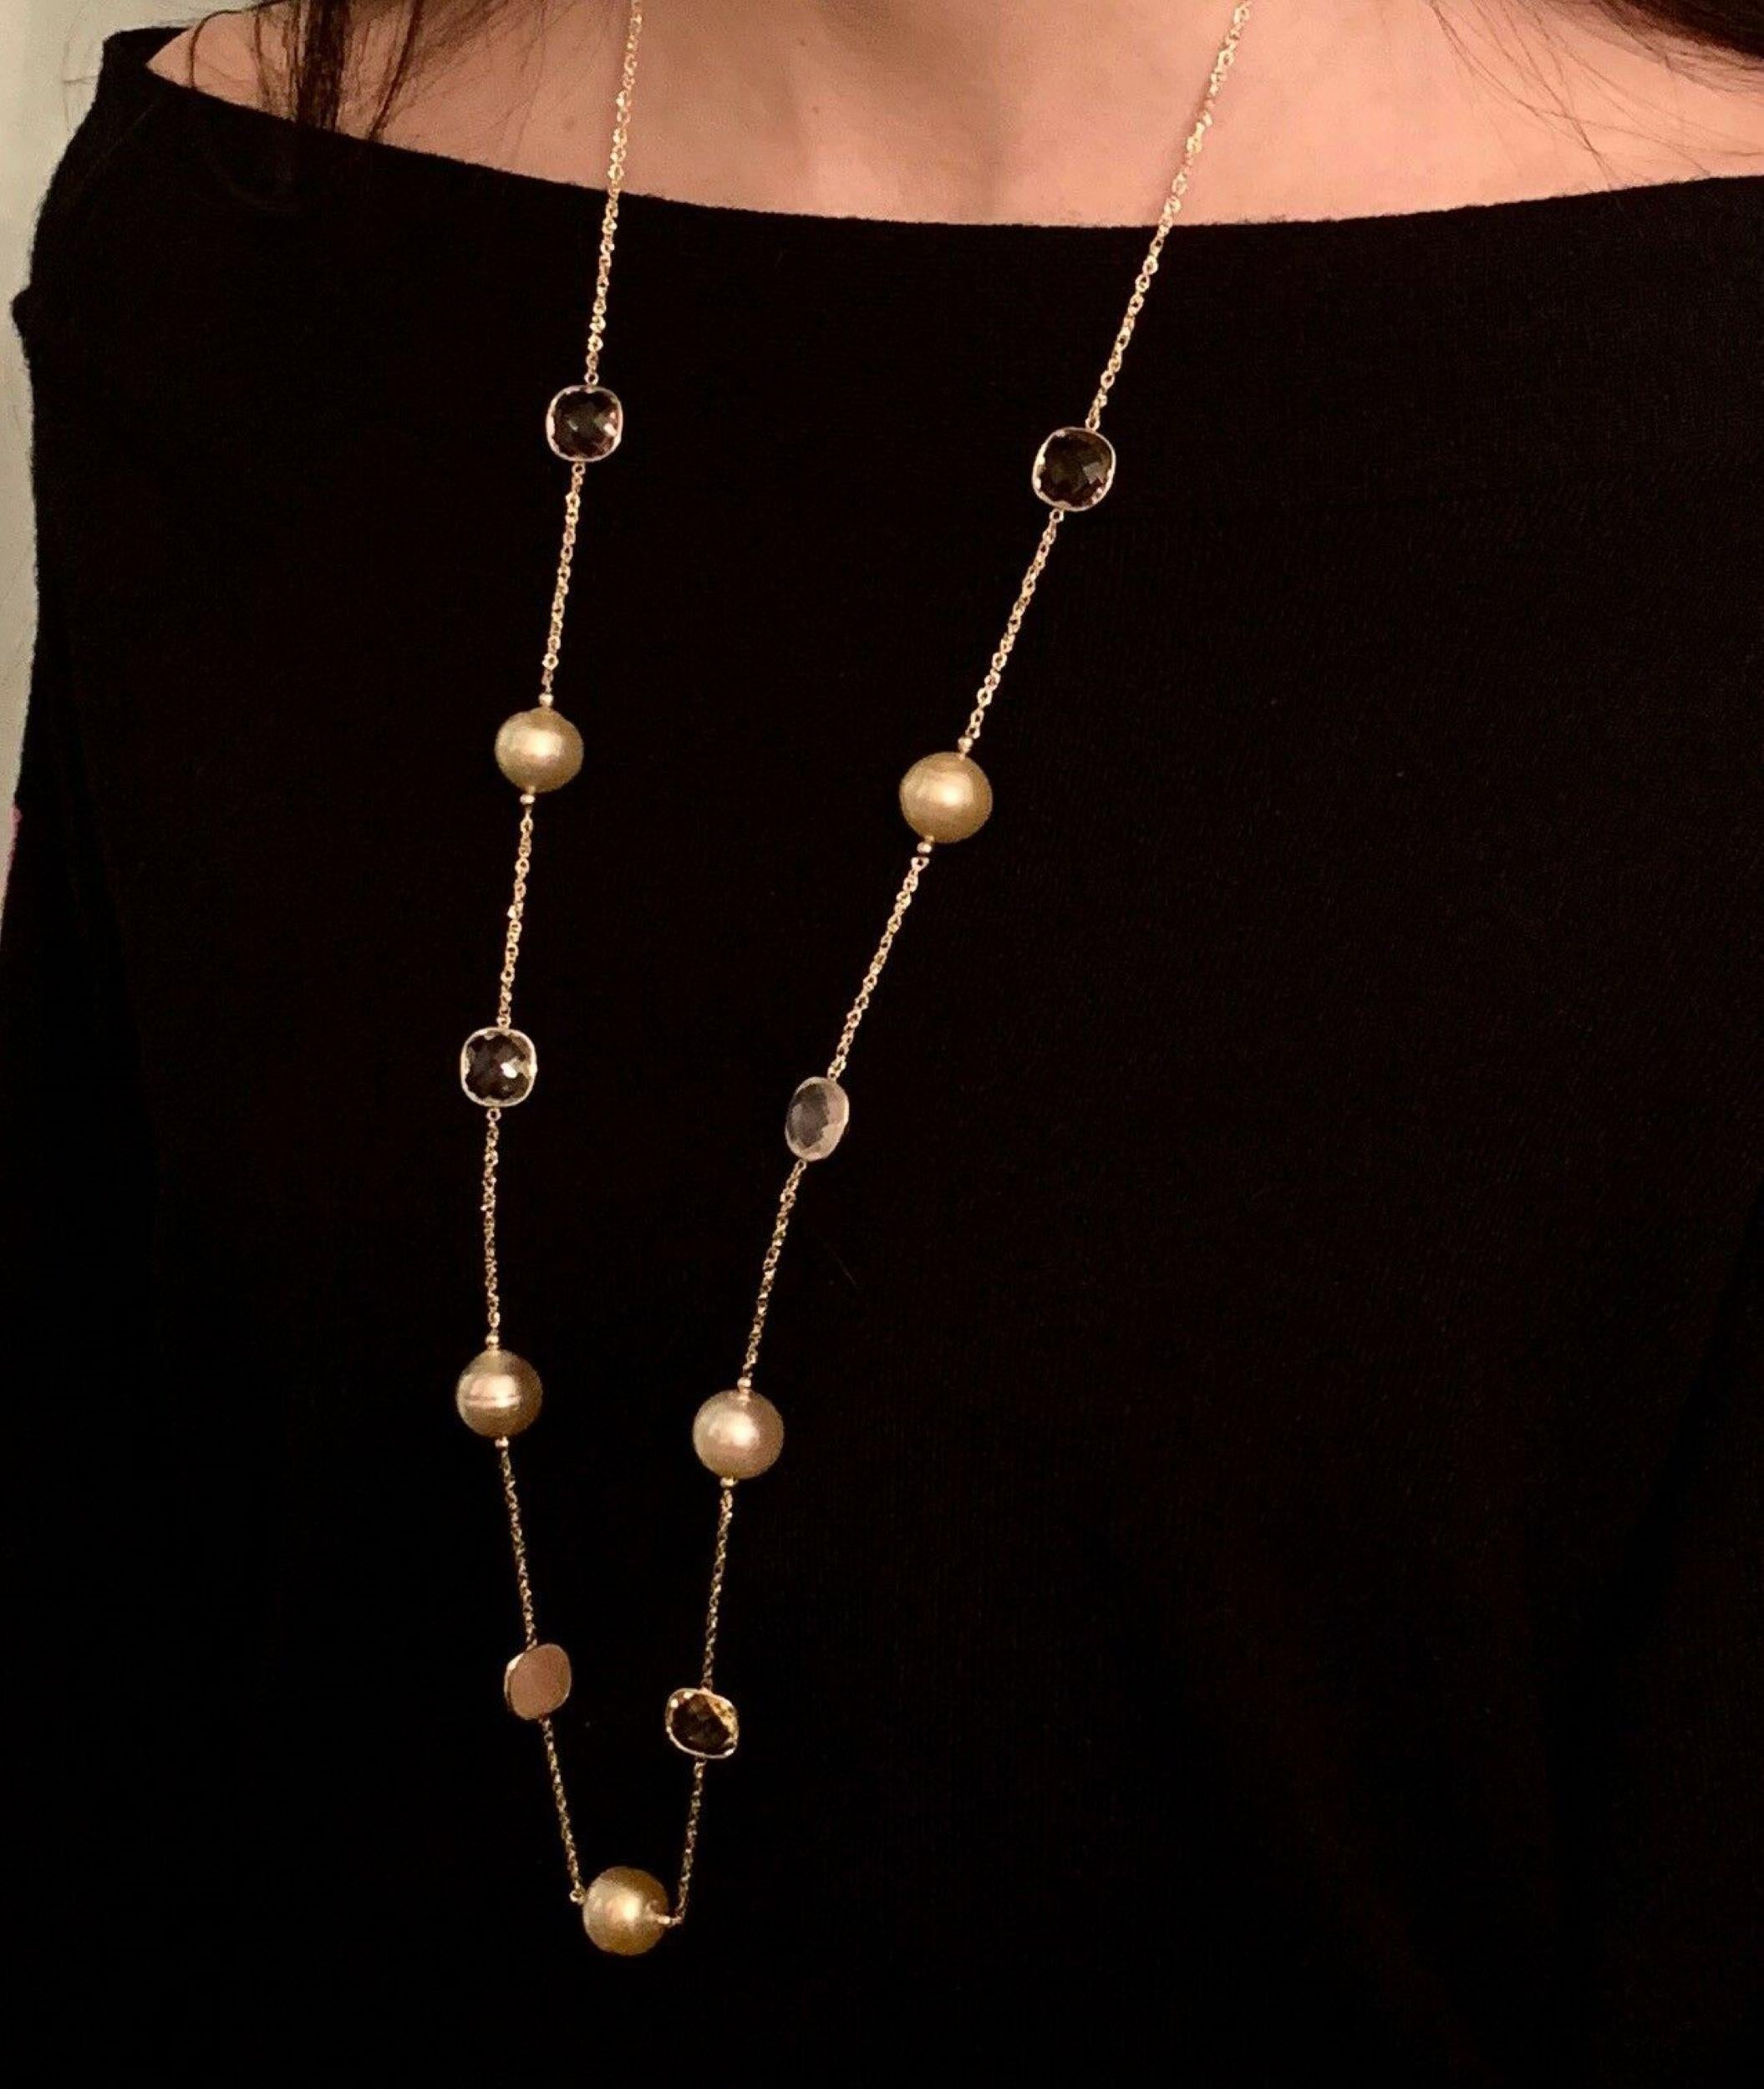 Fine Quality South Sea Pearl Quartz Necklace 14k Gold 14.6 mm Certified $2,970 820708

This is a Unique Custom Made Glamorous Piece of Jewelry!

Nothing says, “I Love you” more than Diamonds and Pearls!

This South Sea pearl necklace has been